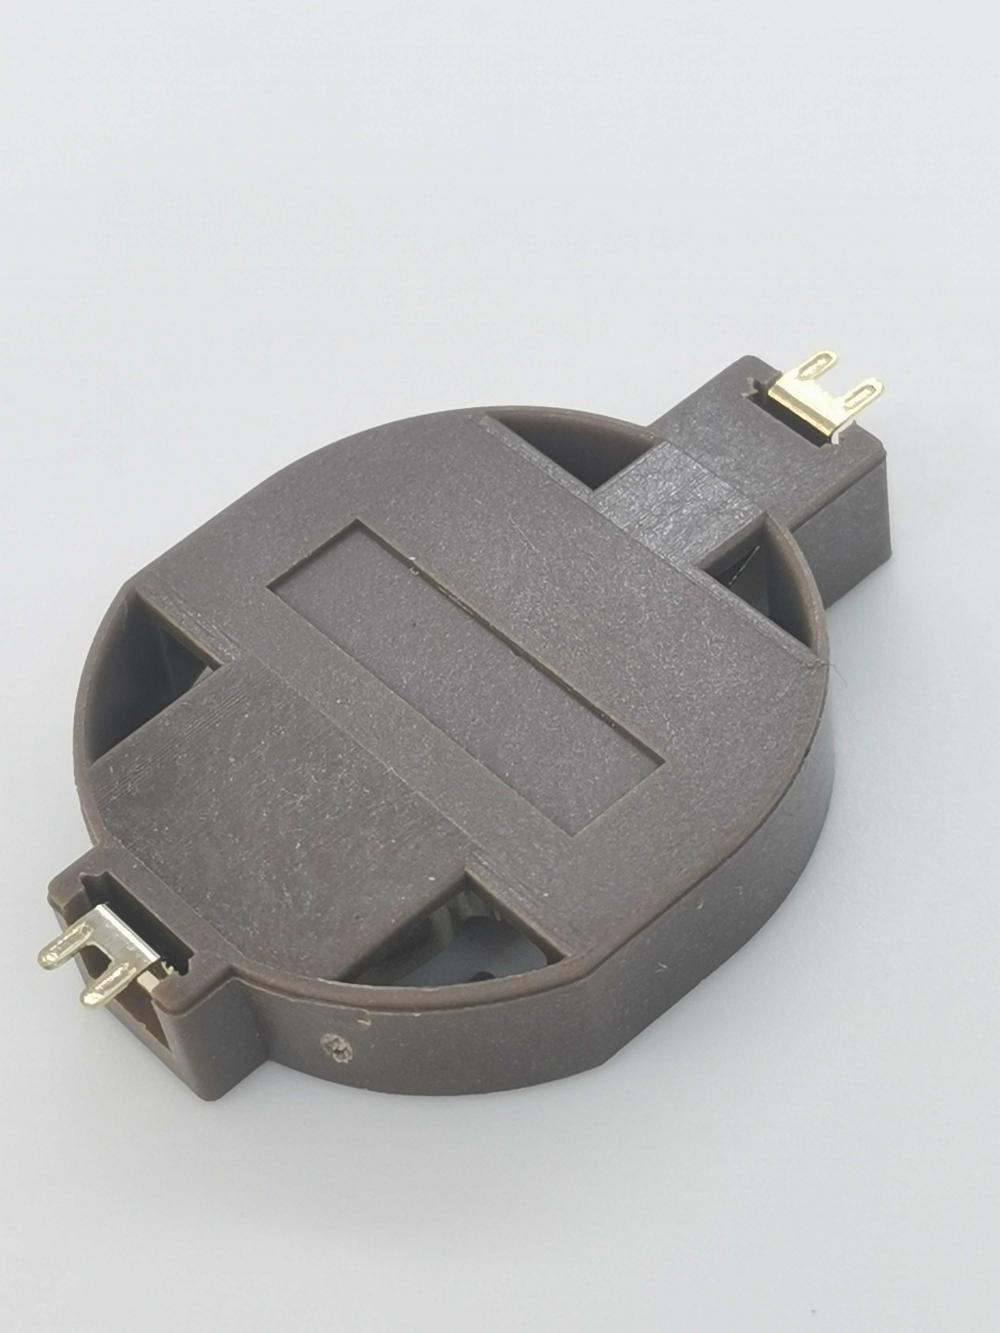 Cr2032 Surface Mount (SMT) Lithium Coin Cell Holder